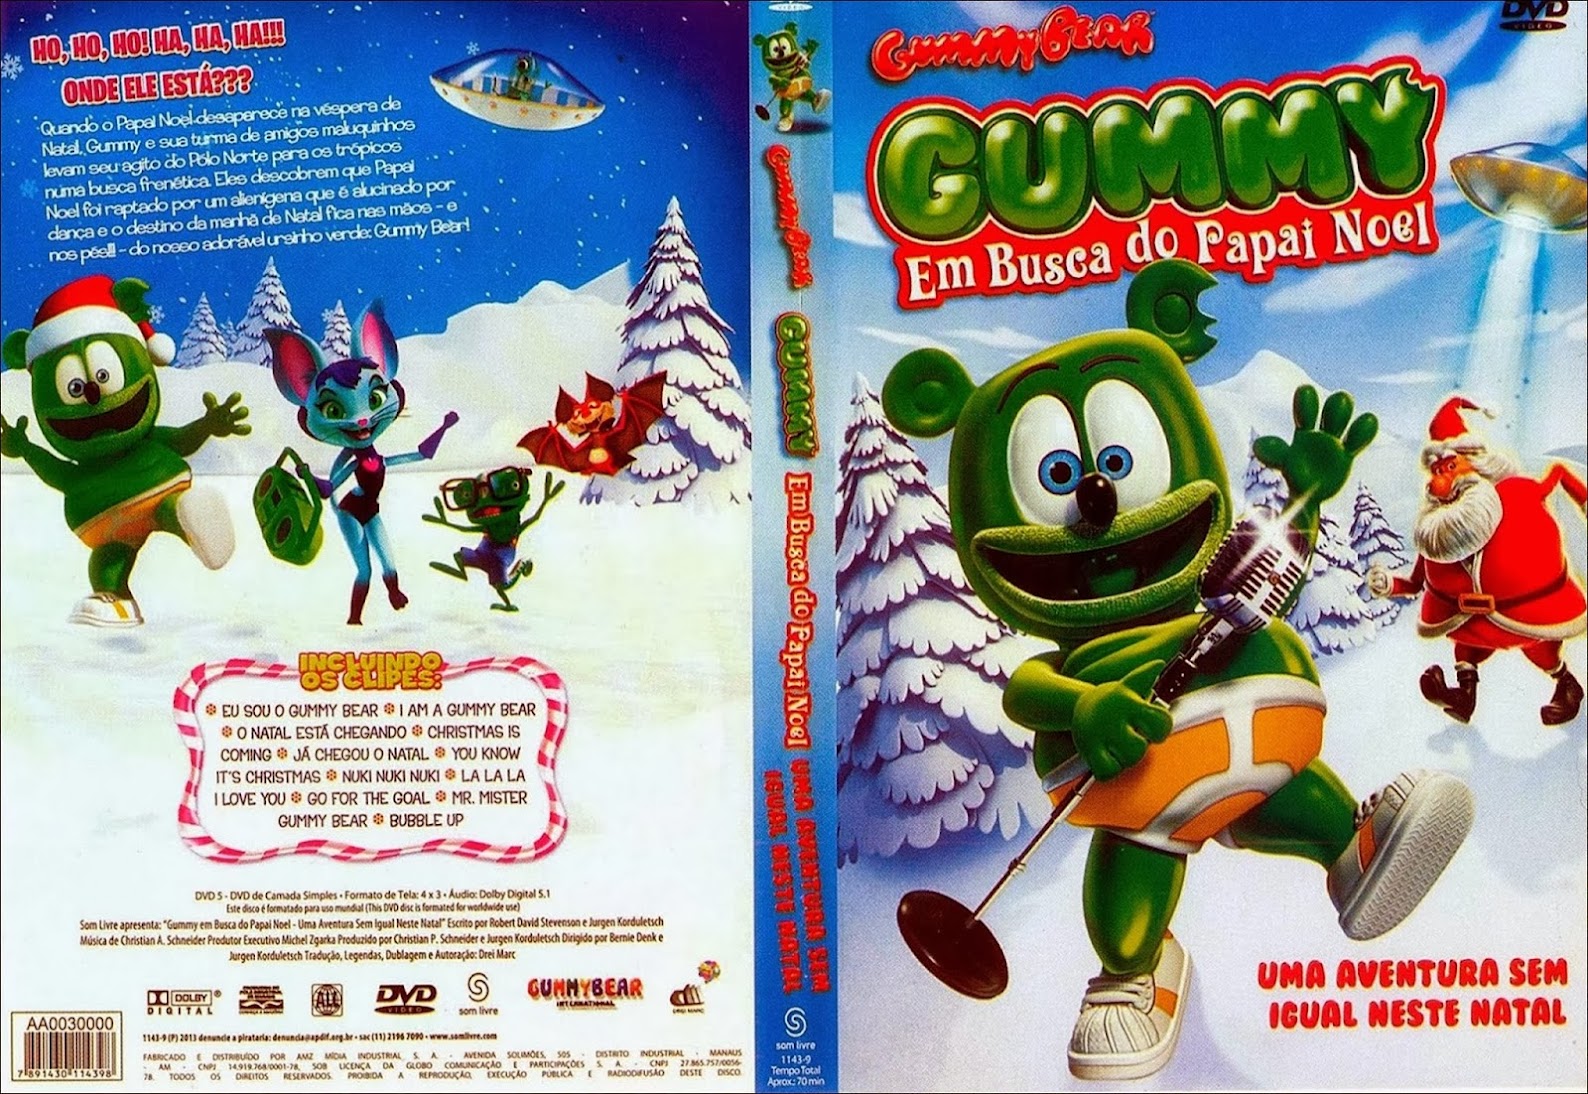 Gummy bear текст. The Gummy Bear диск. Gummy Bear DVD. Gummy Bear DVD Christmas. Yummy Gummy search for Santa.